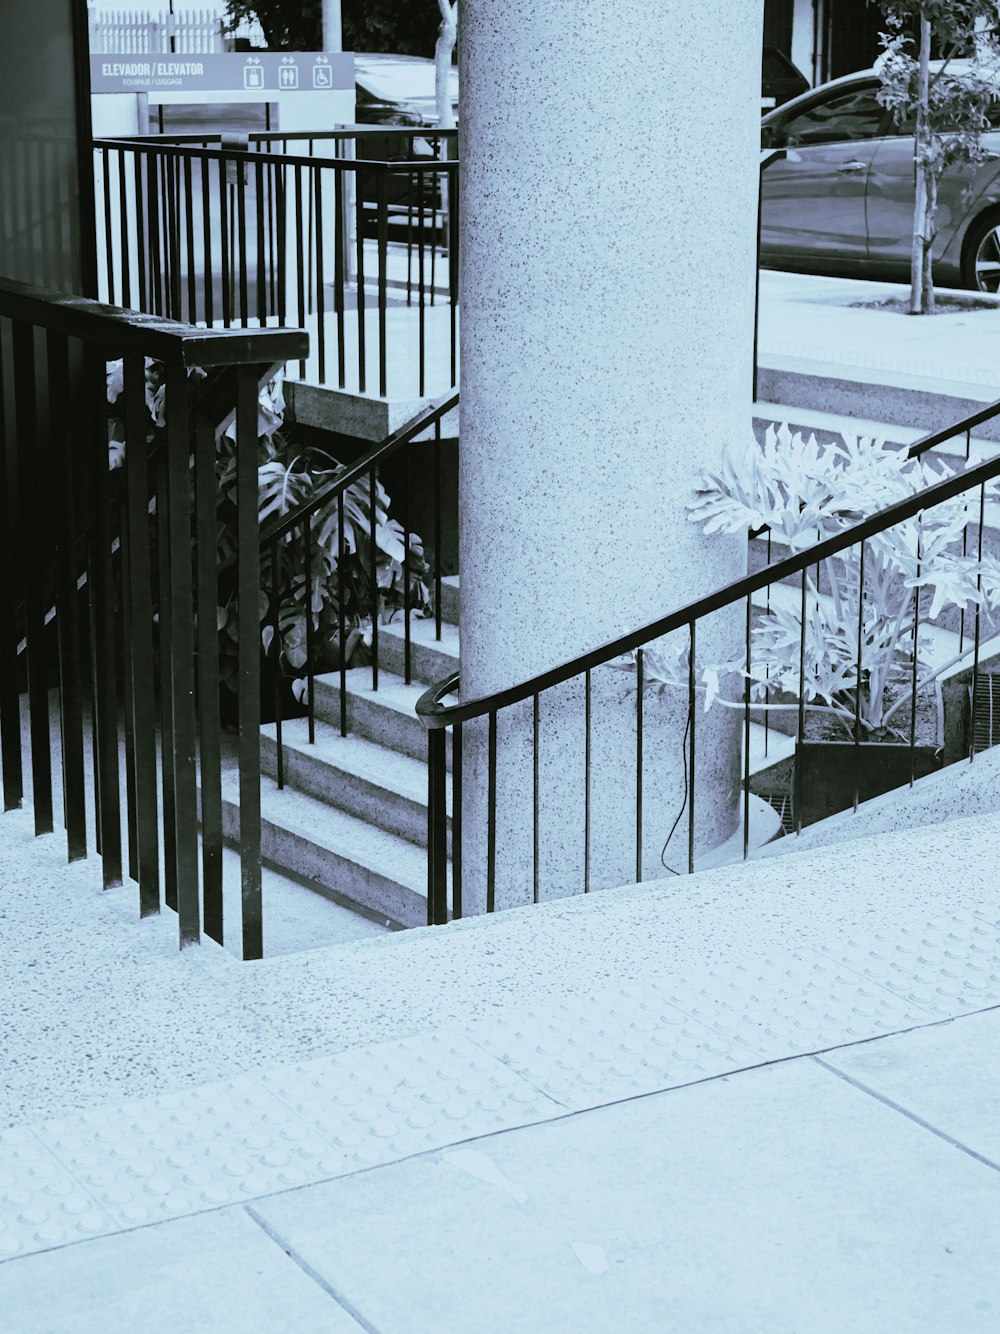 a snow covered stairway